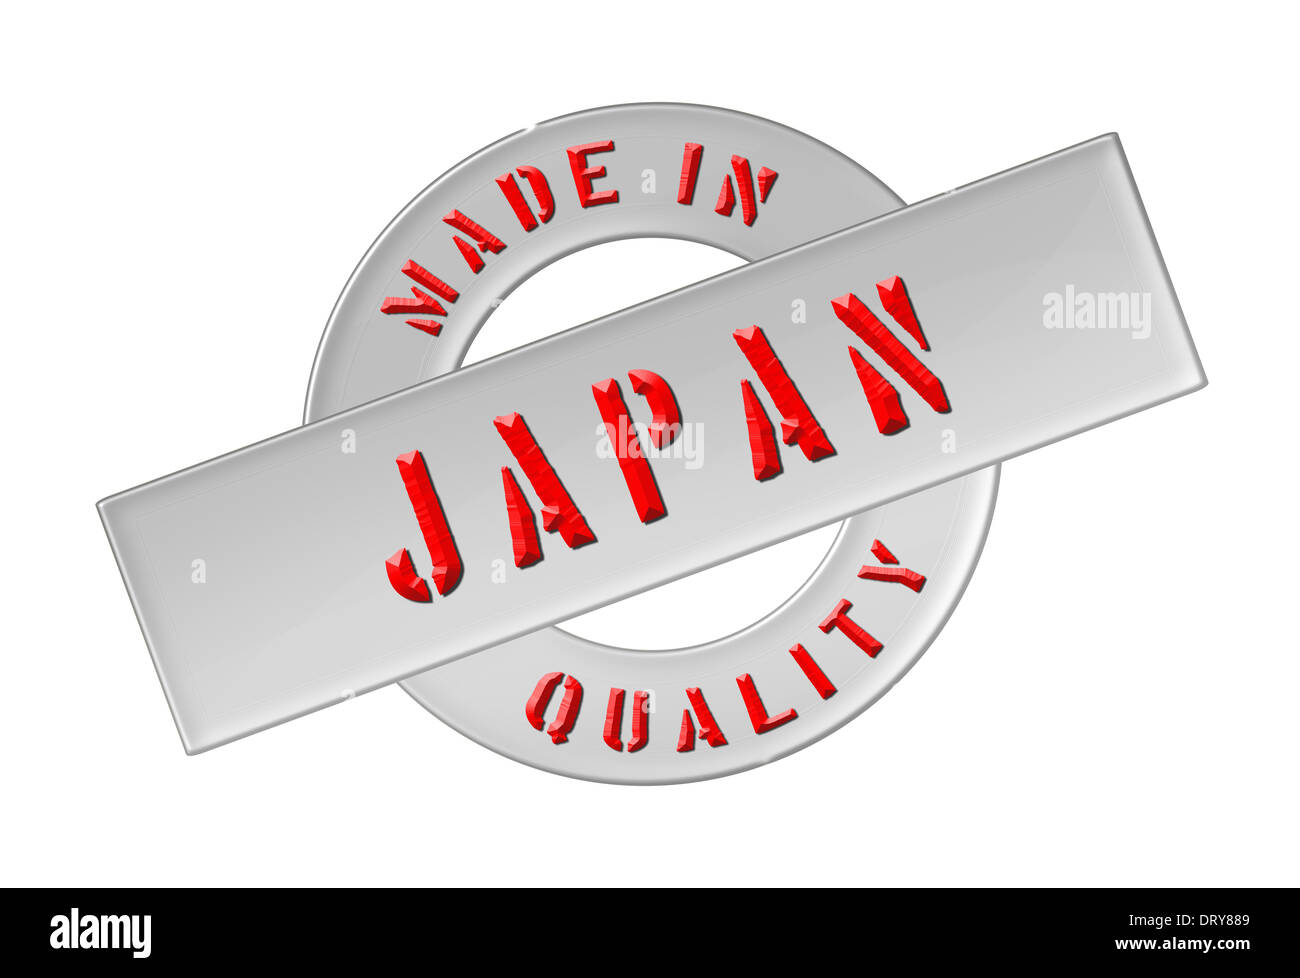 Made in Japan Stock Photo